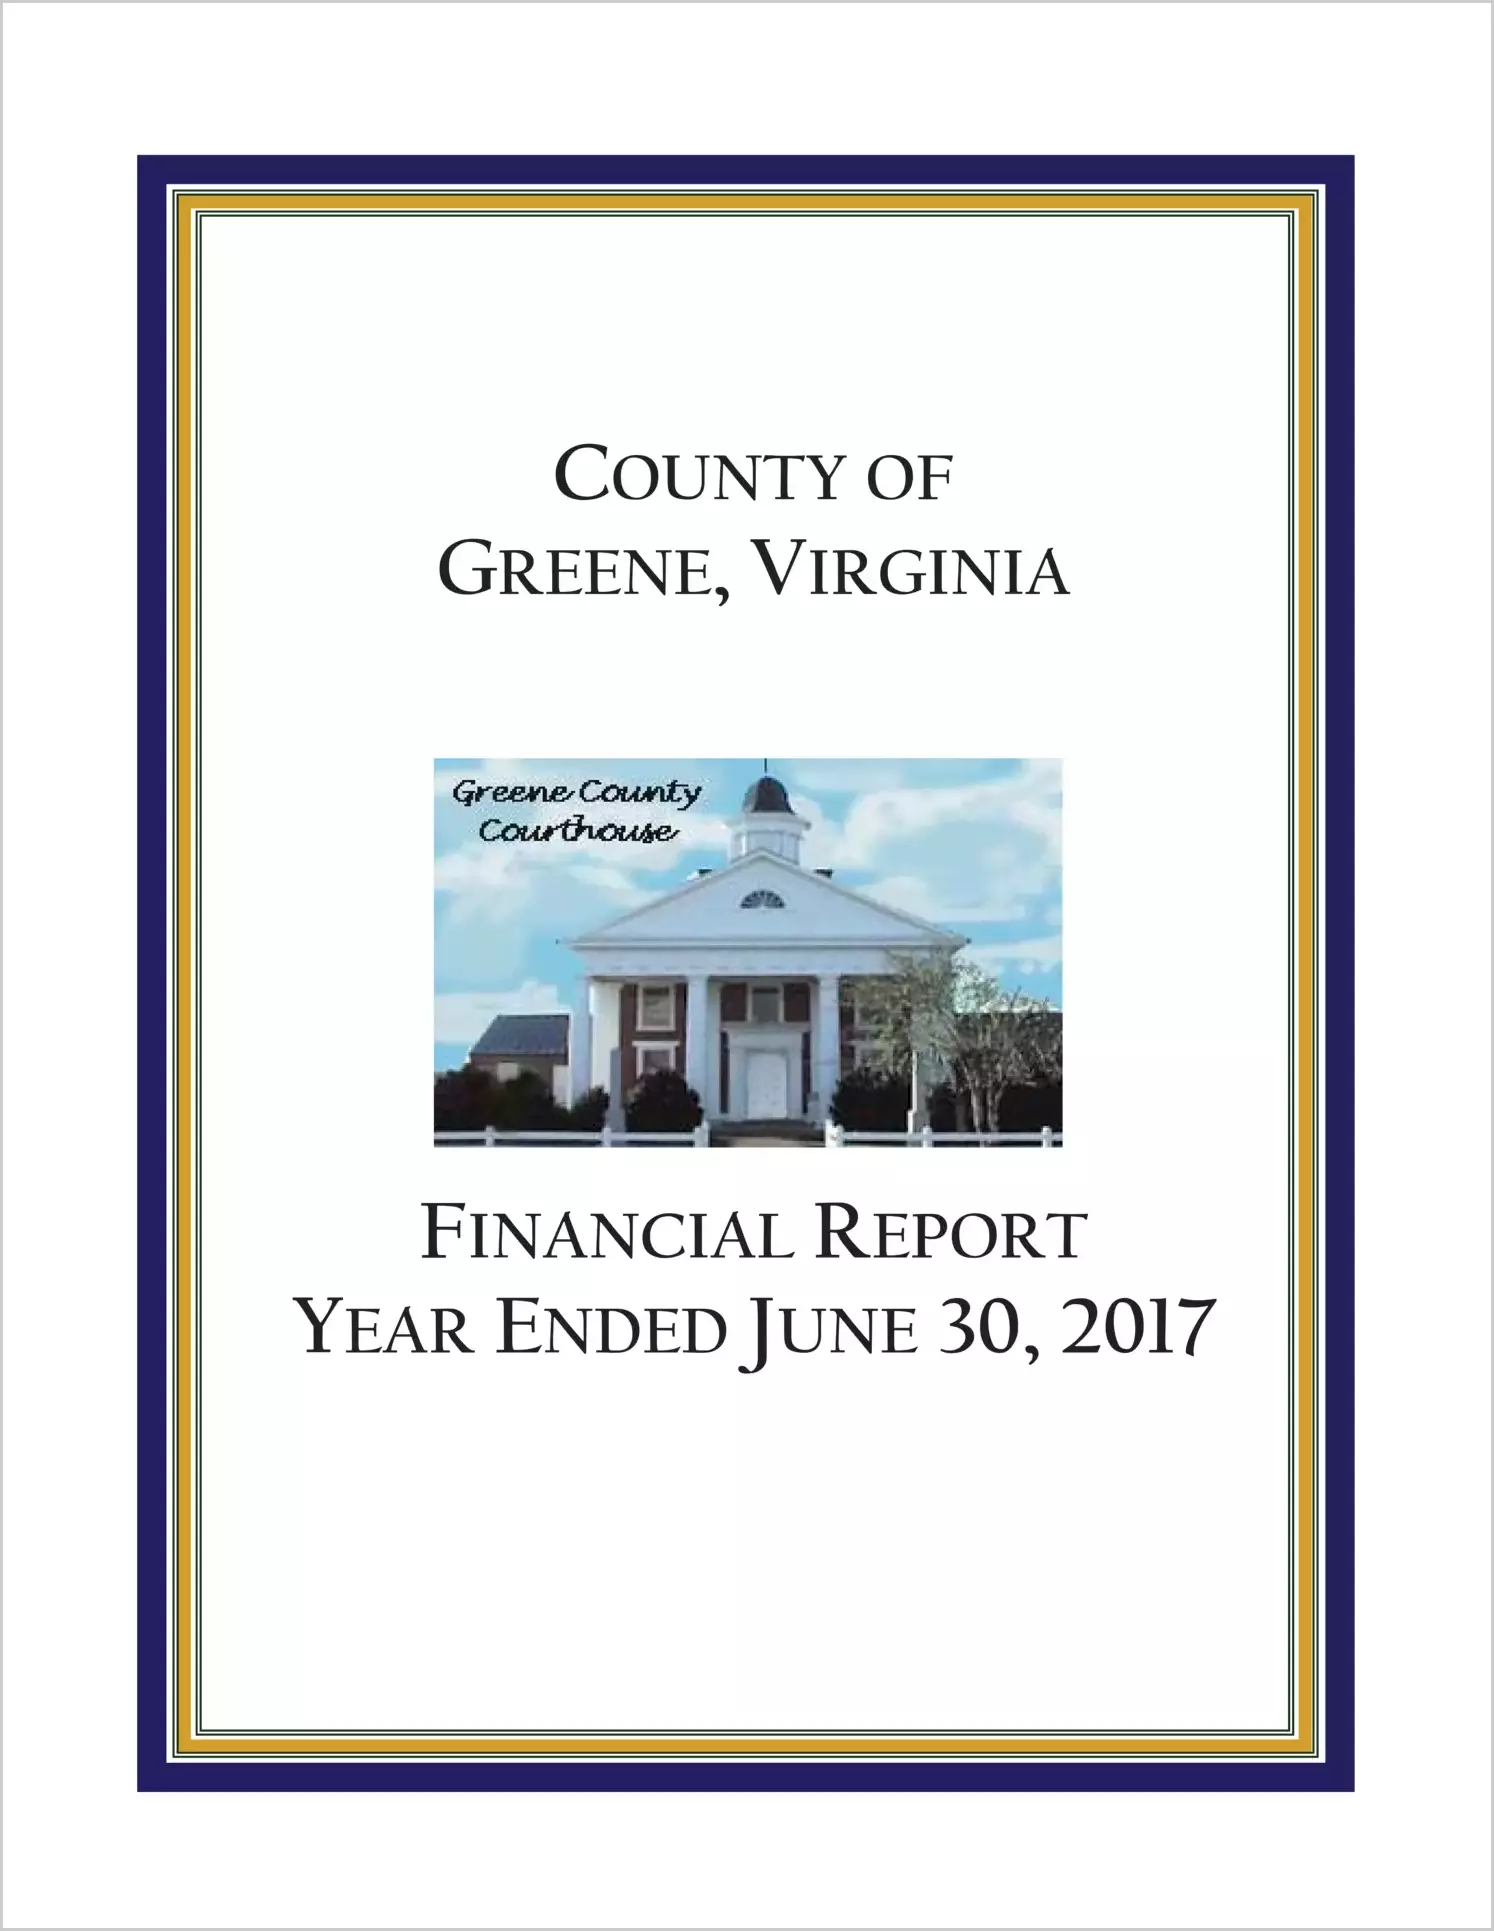 2017 Annual Financial Report for County of Greene